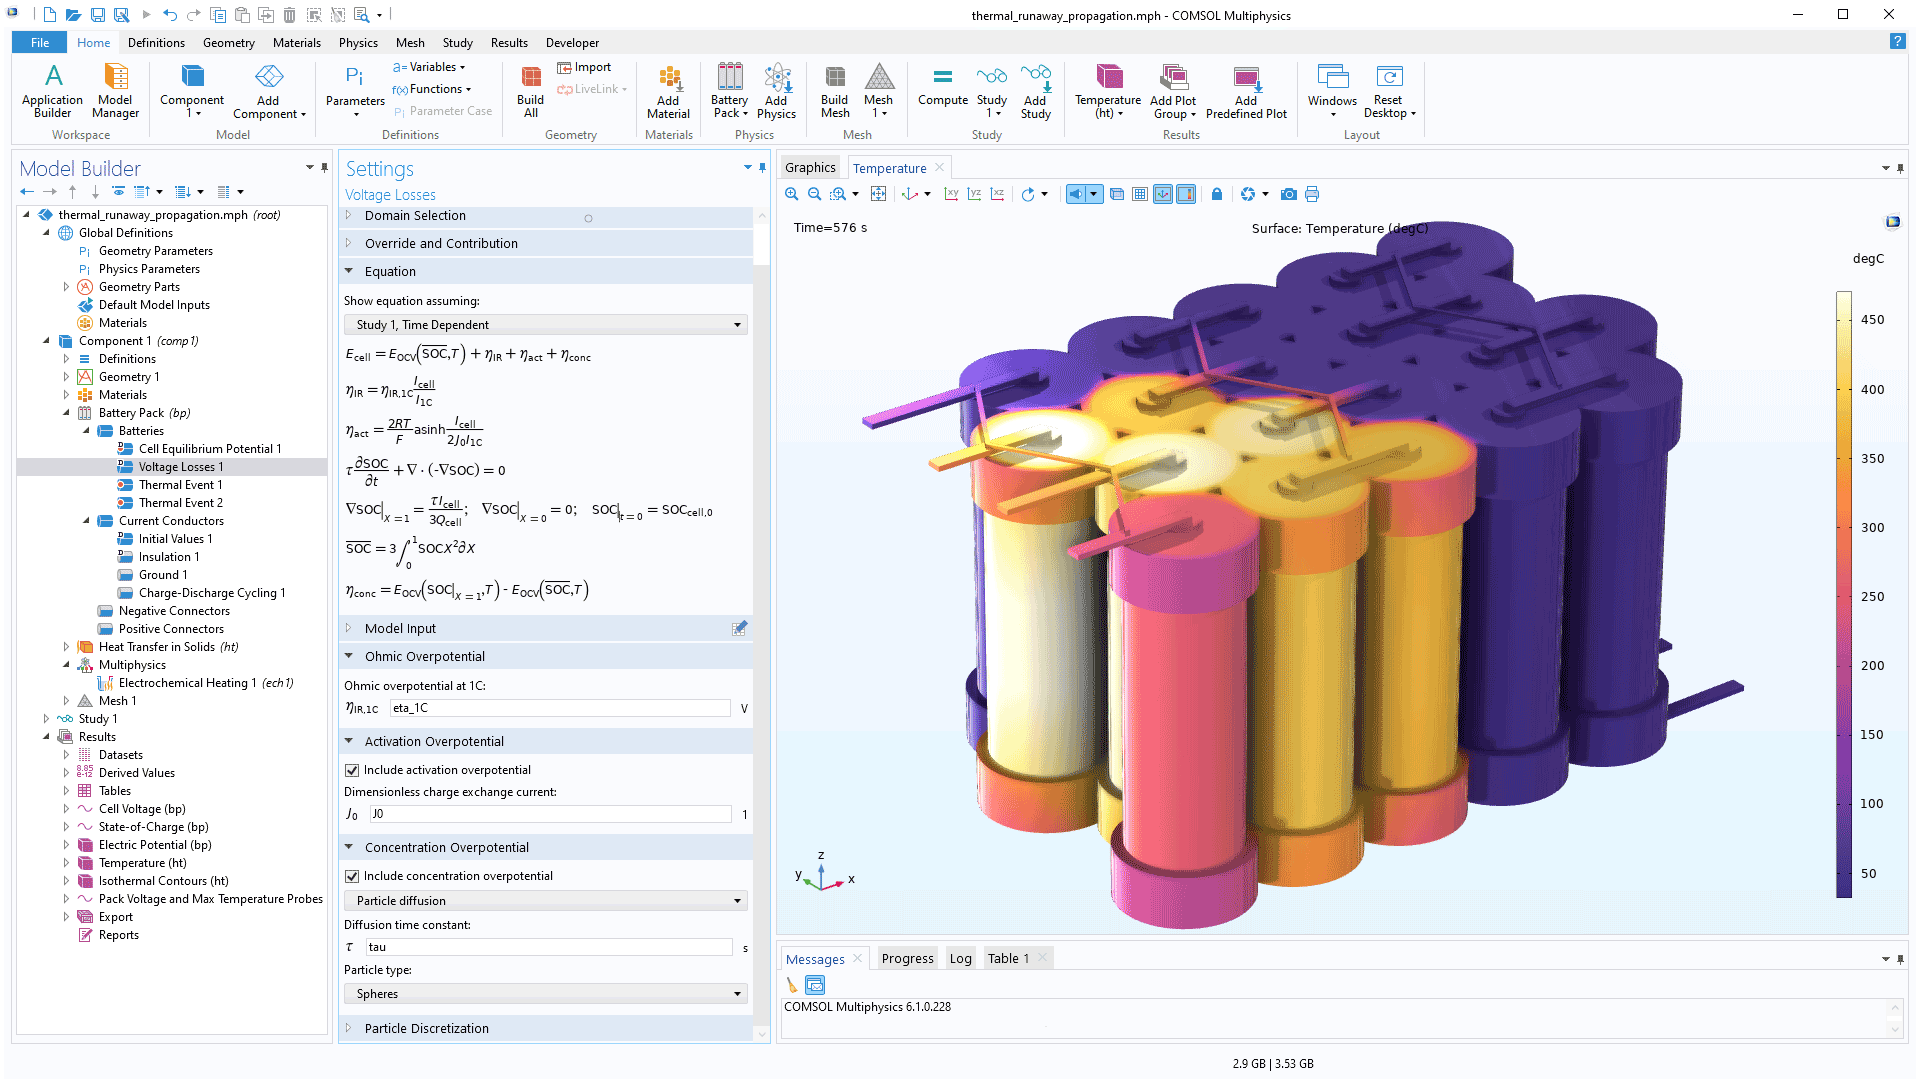 The COMSOL Multiphysics UI showing the Model Builder with the Voltage Losses node highlighted, the corresponding Settings window, and a battery pack model in the Graphics window.